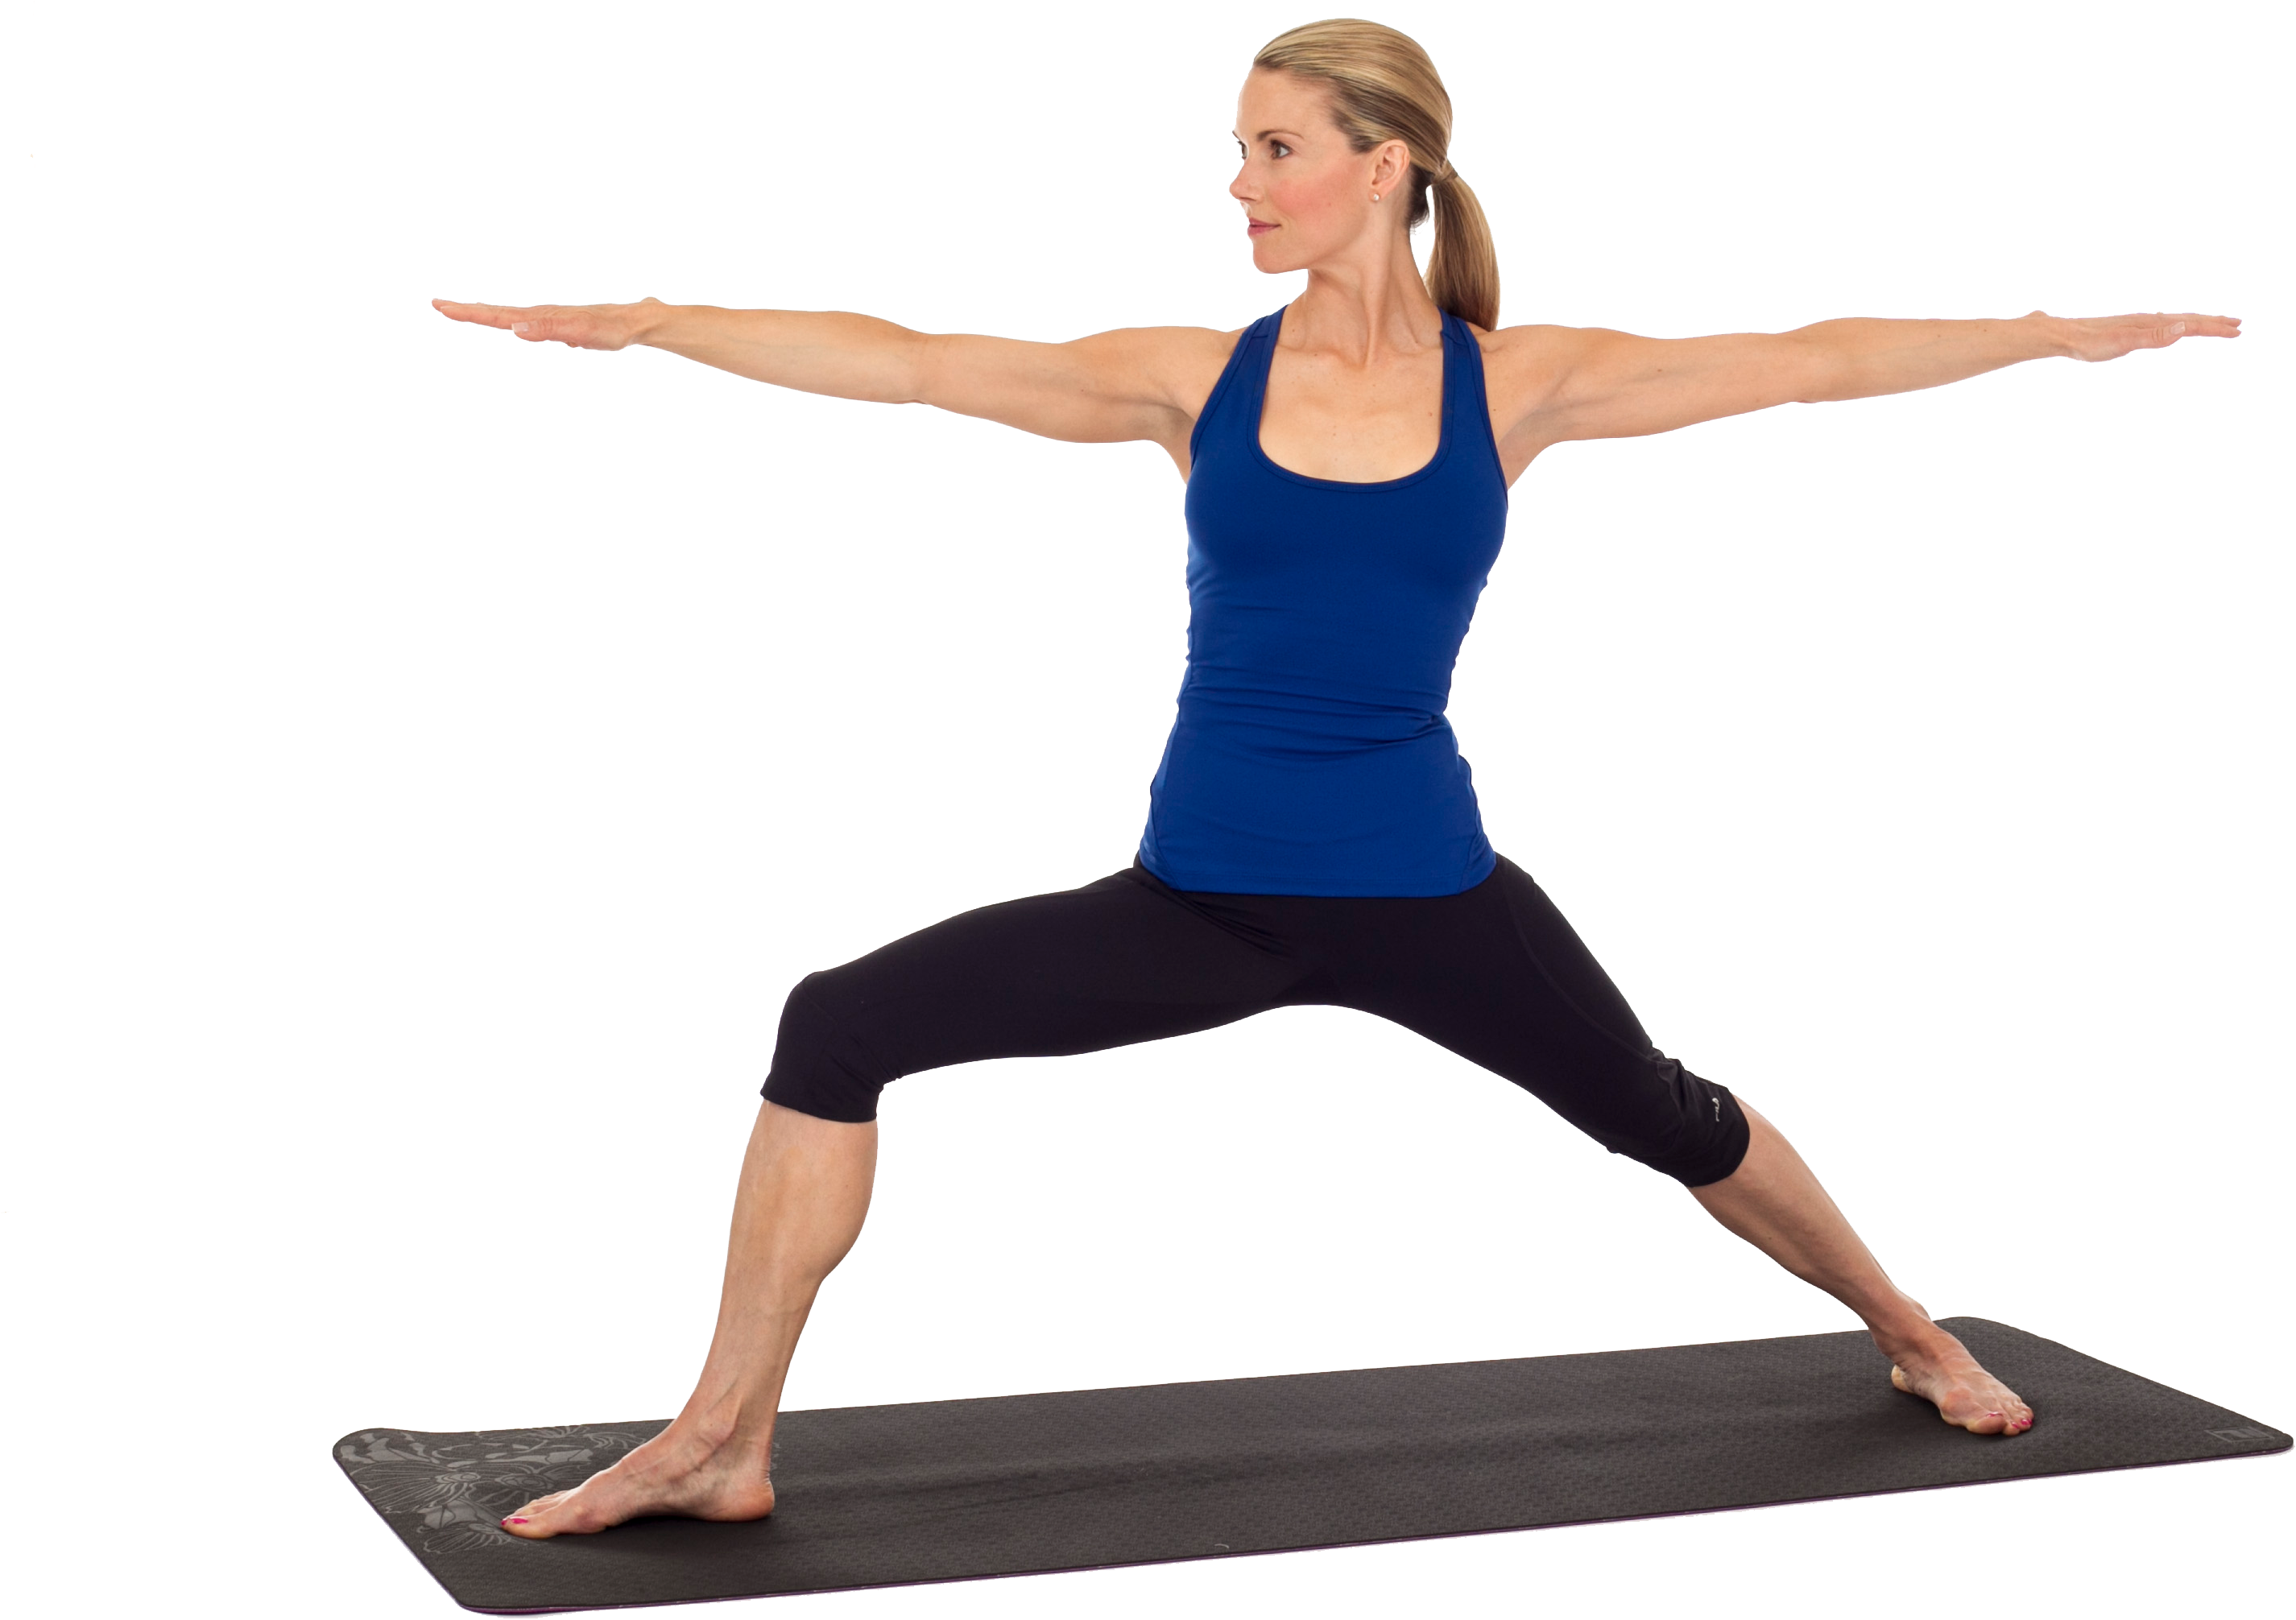 A Woman In A Blue Tank Top And Black Pants Doing Yoga